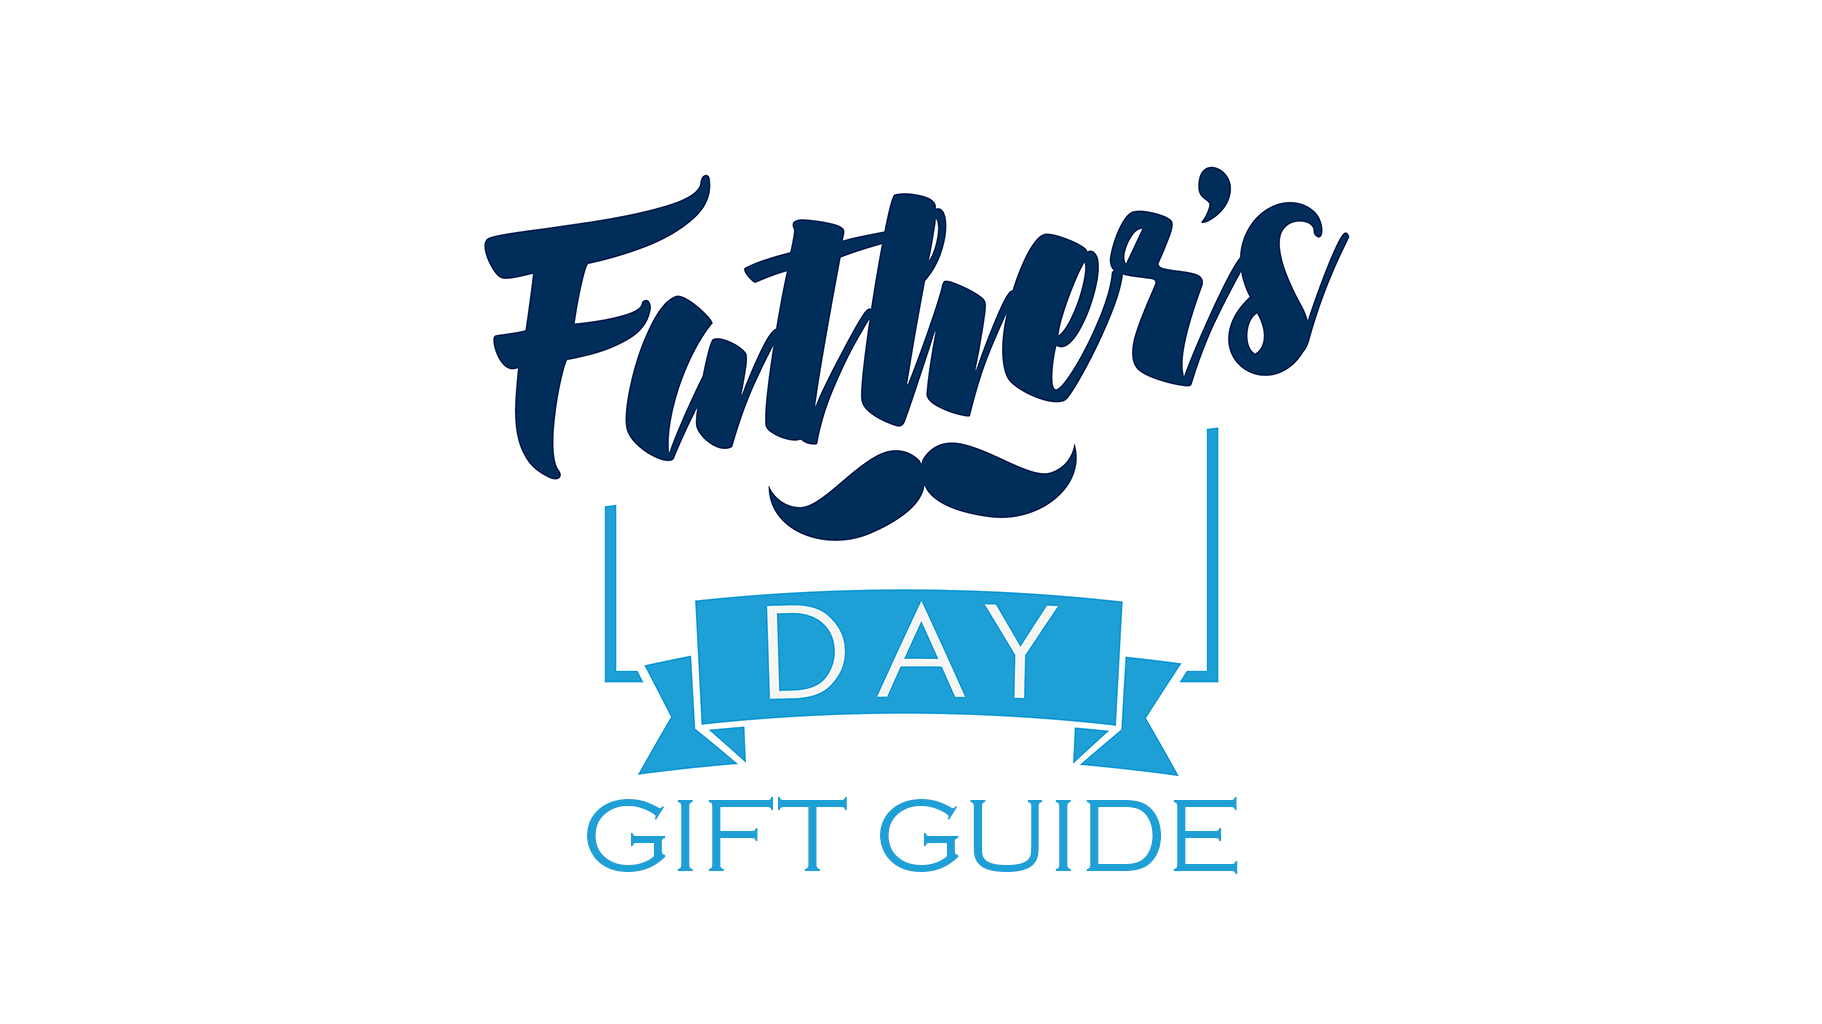 Gifts for Father's Day at Fernbaughs Jewelers In Plymouth In